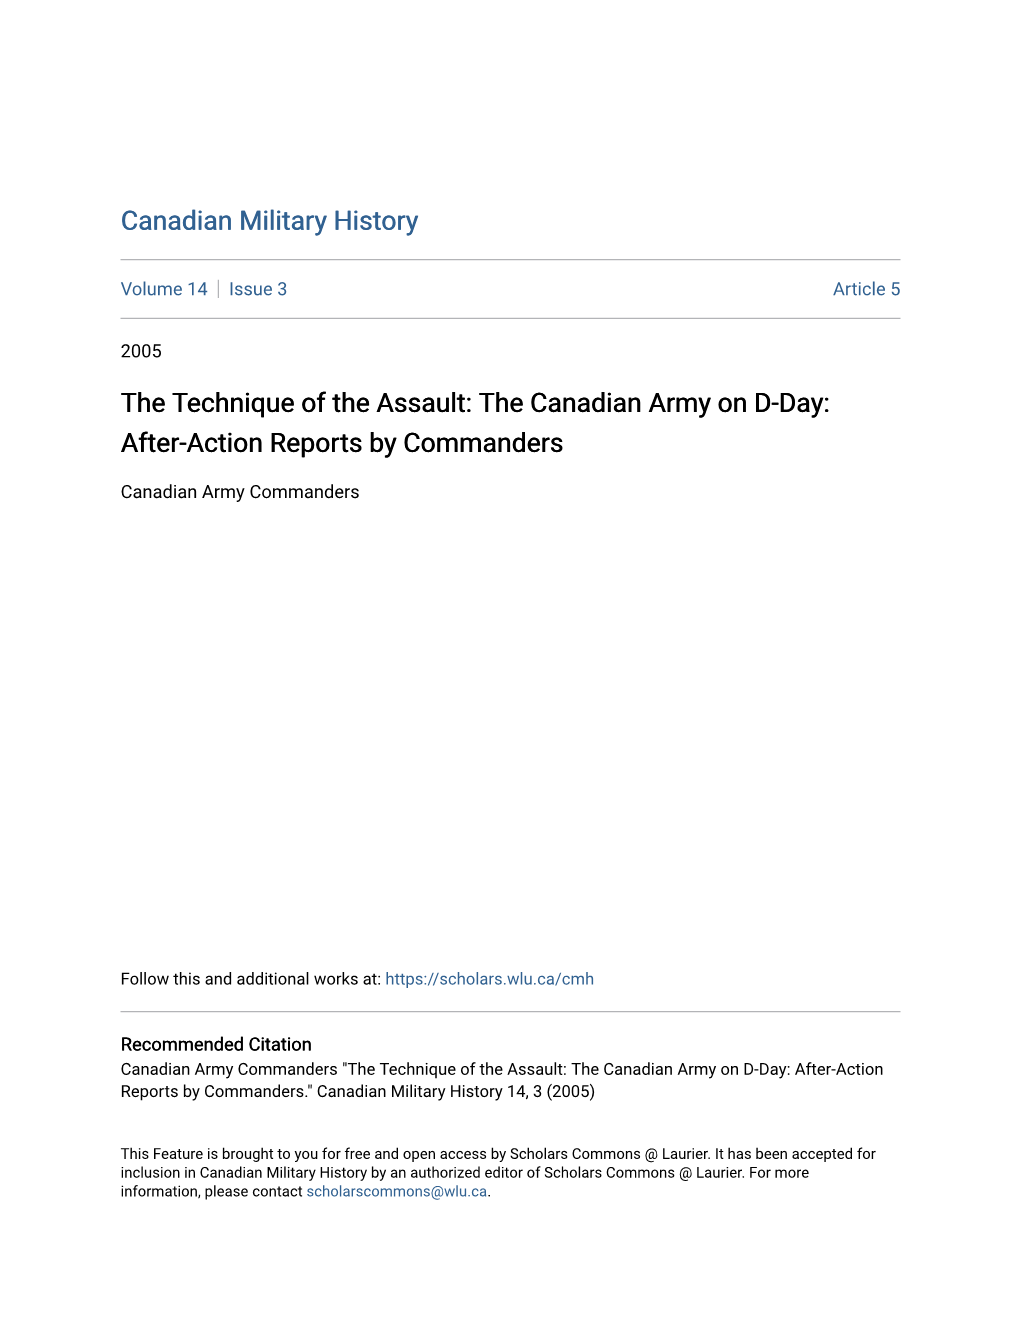 The Canadian Army on D-Day: After-Action Reports by Commanders